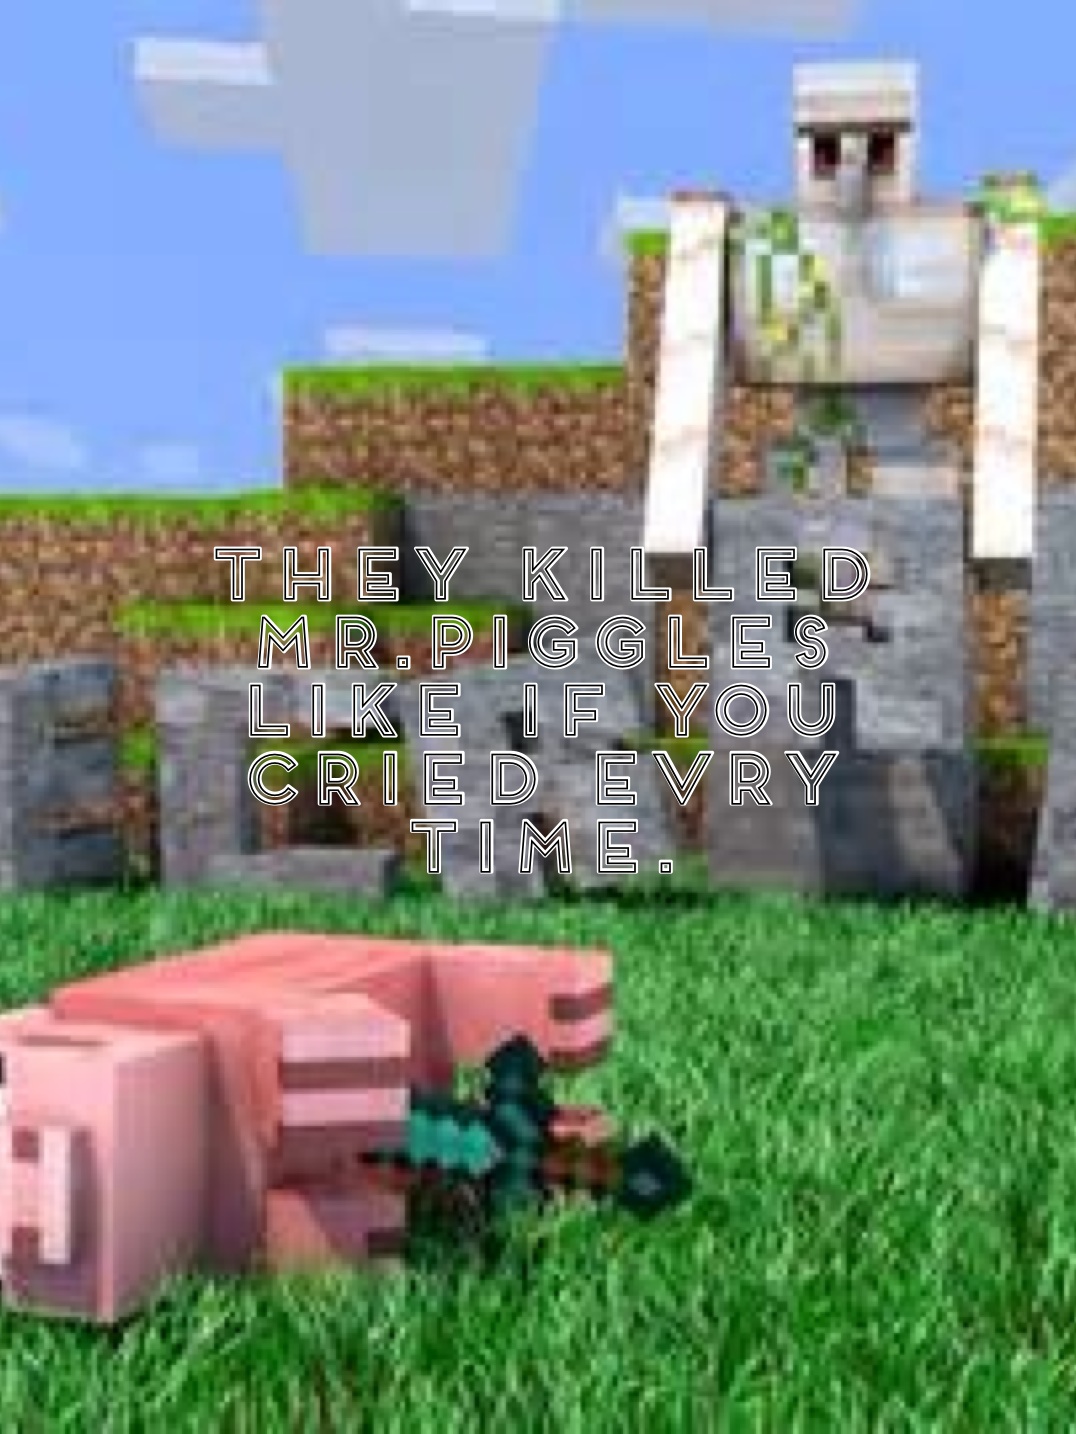 They killed mr.piggles like if you cried evry time.